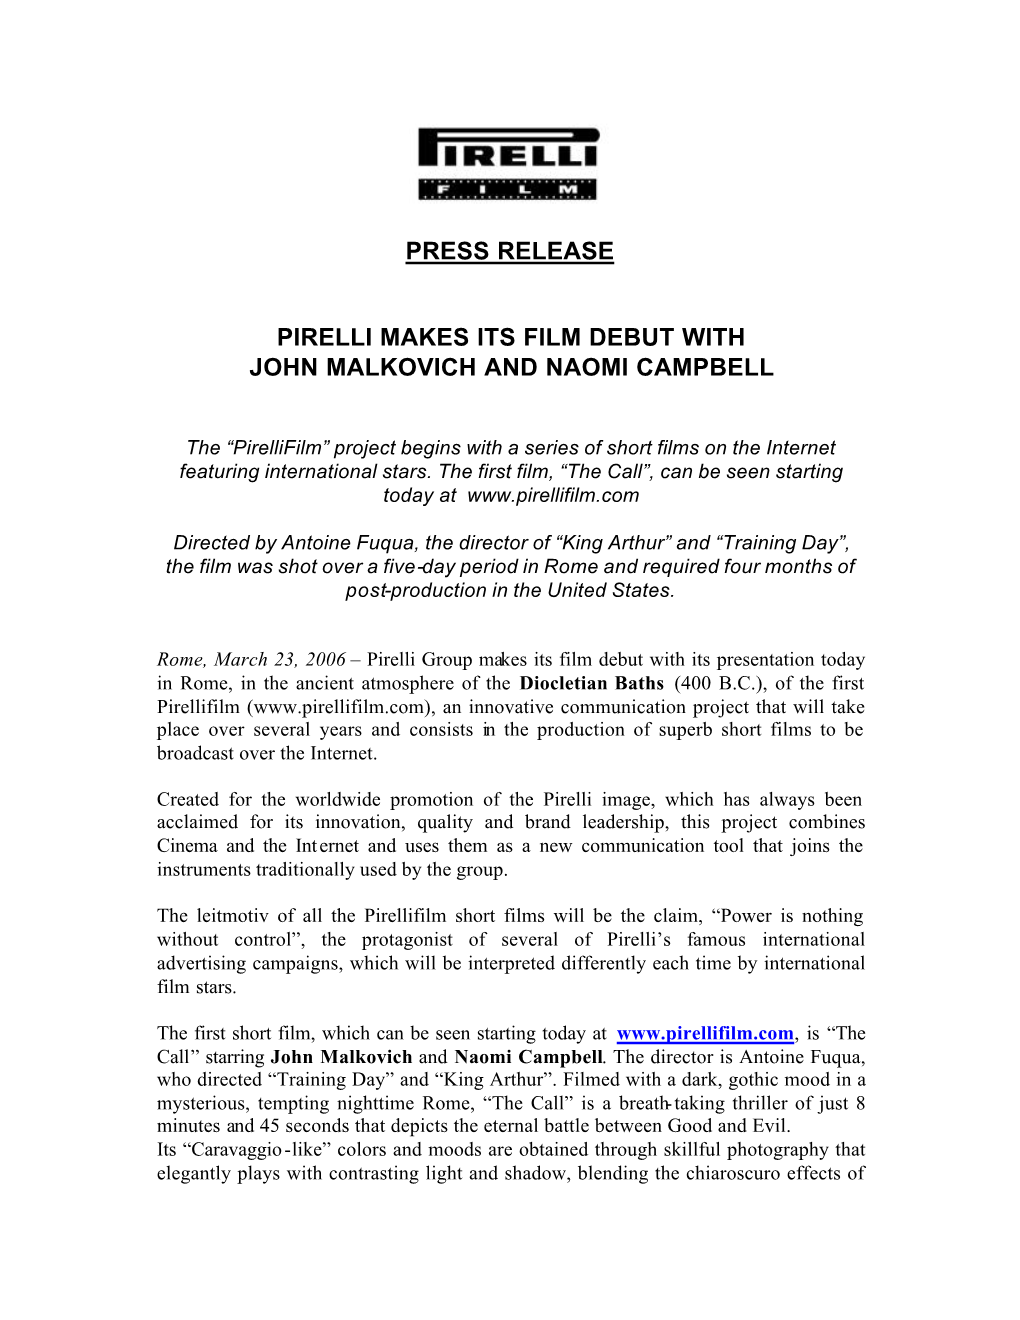 Press Release Pirelli Makes Its Film Debut with John Malkovich And